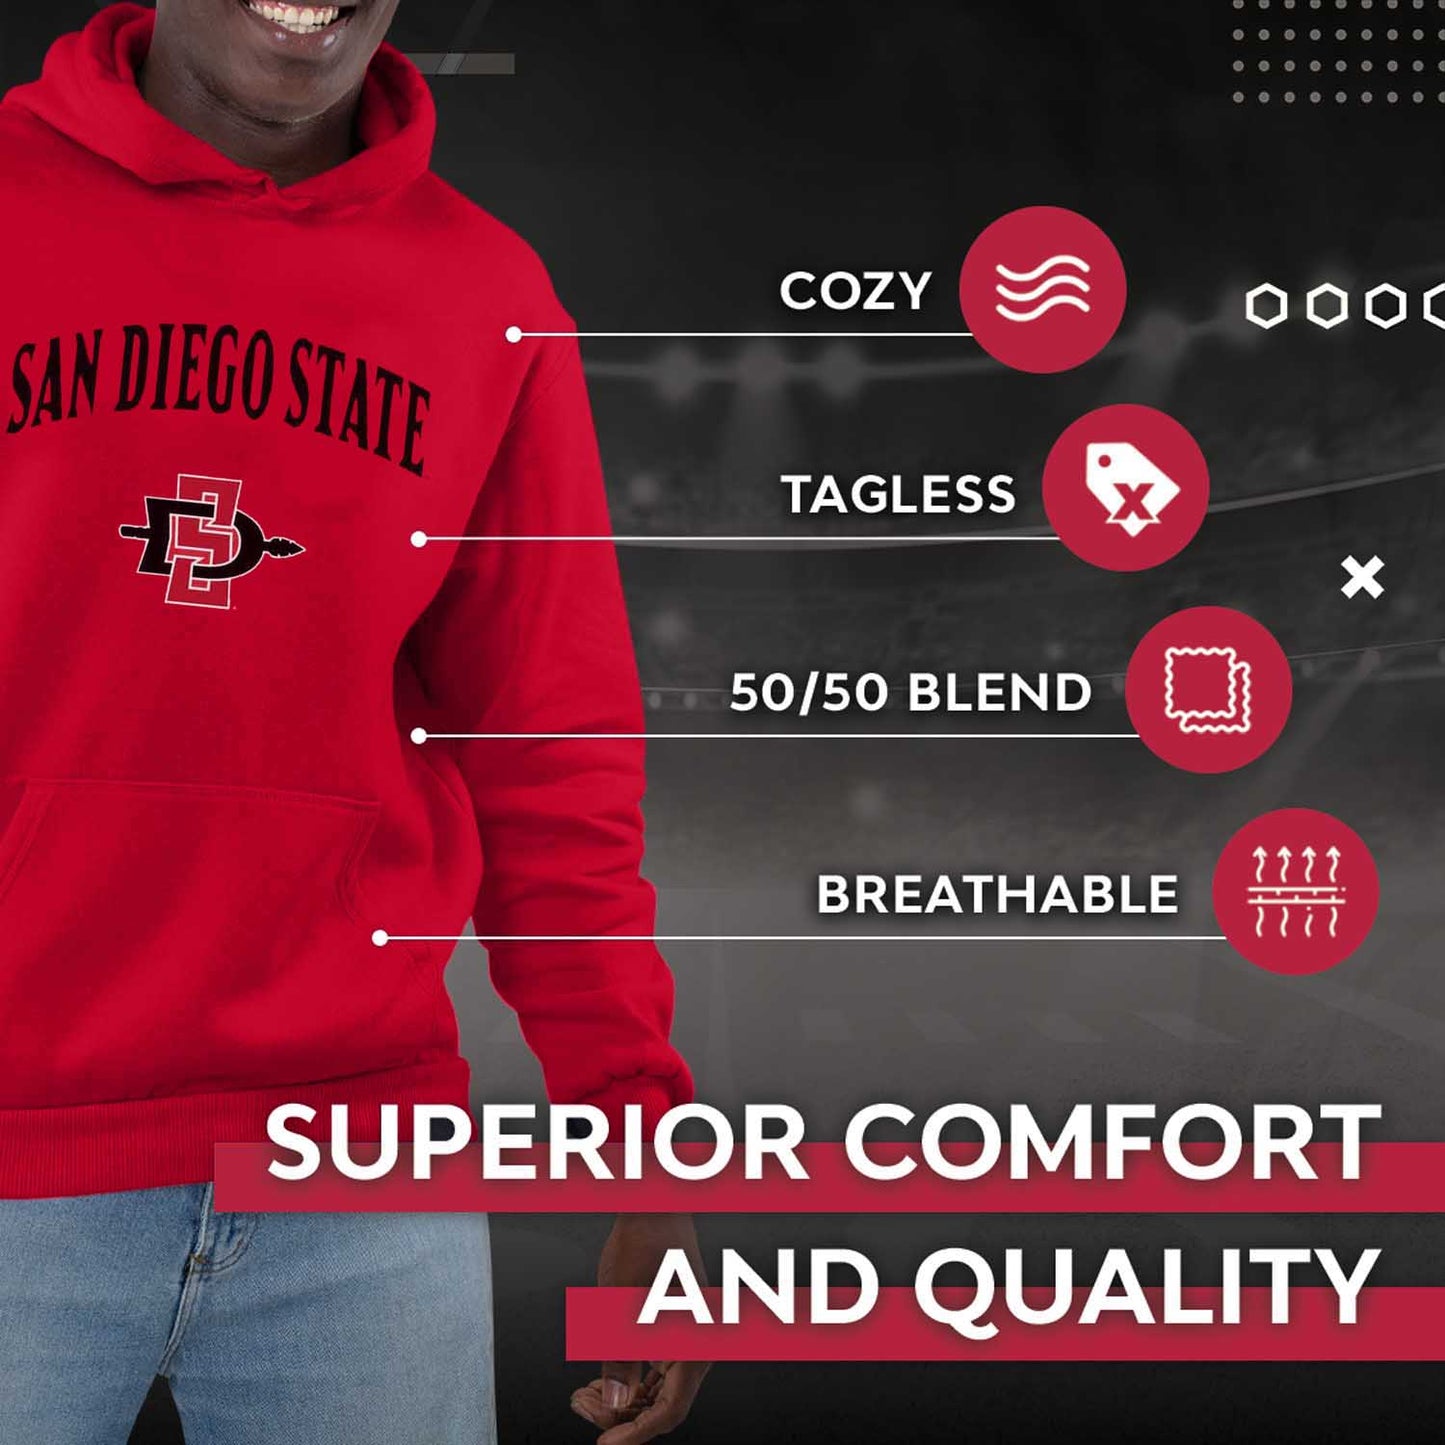 San Diego State Aztecs Adult Arch & Logo Soft Style Gameday Hooded Sweatshirt - Red